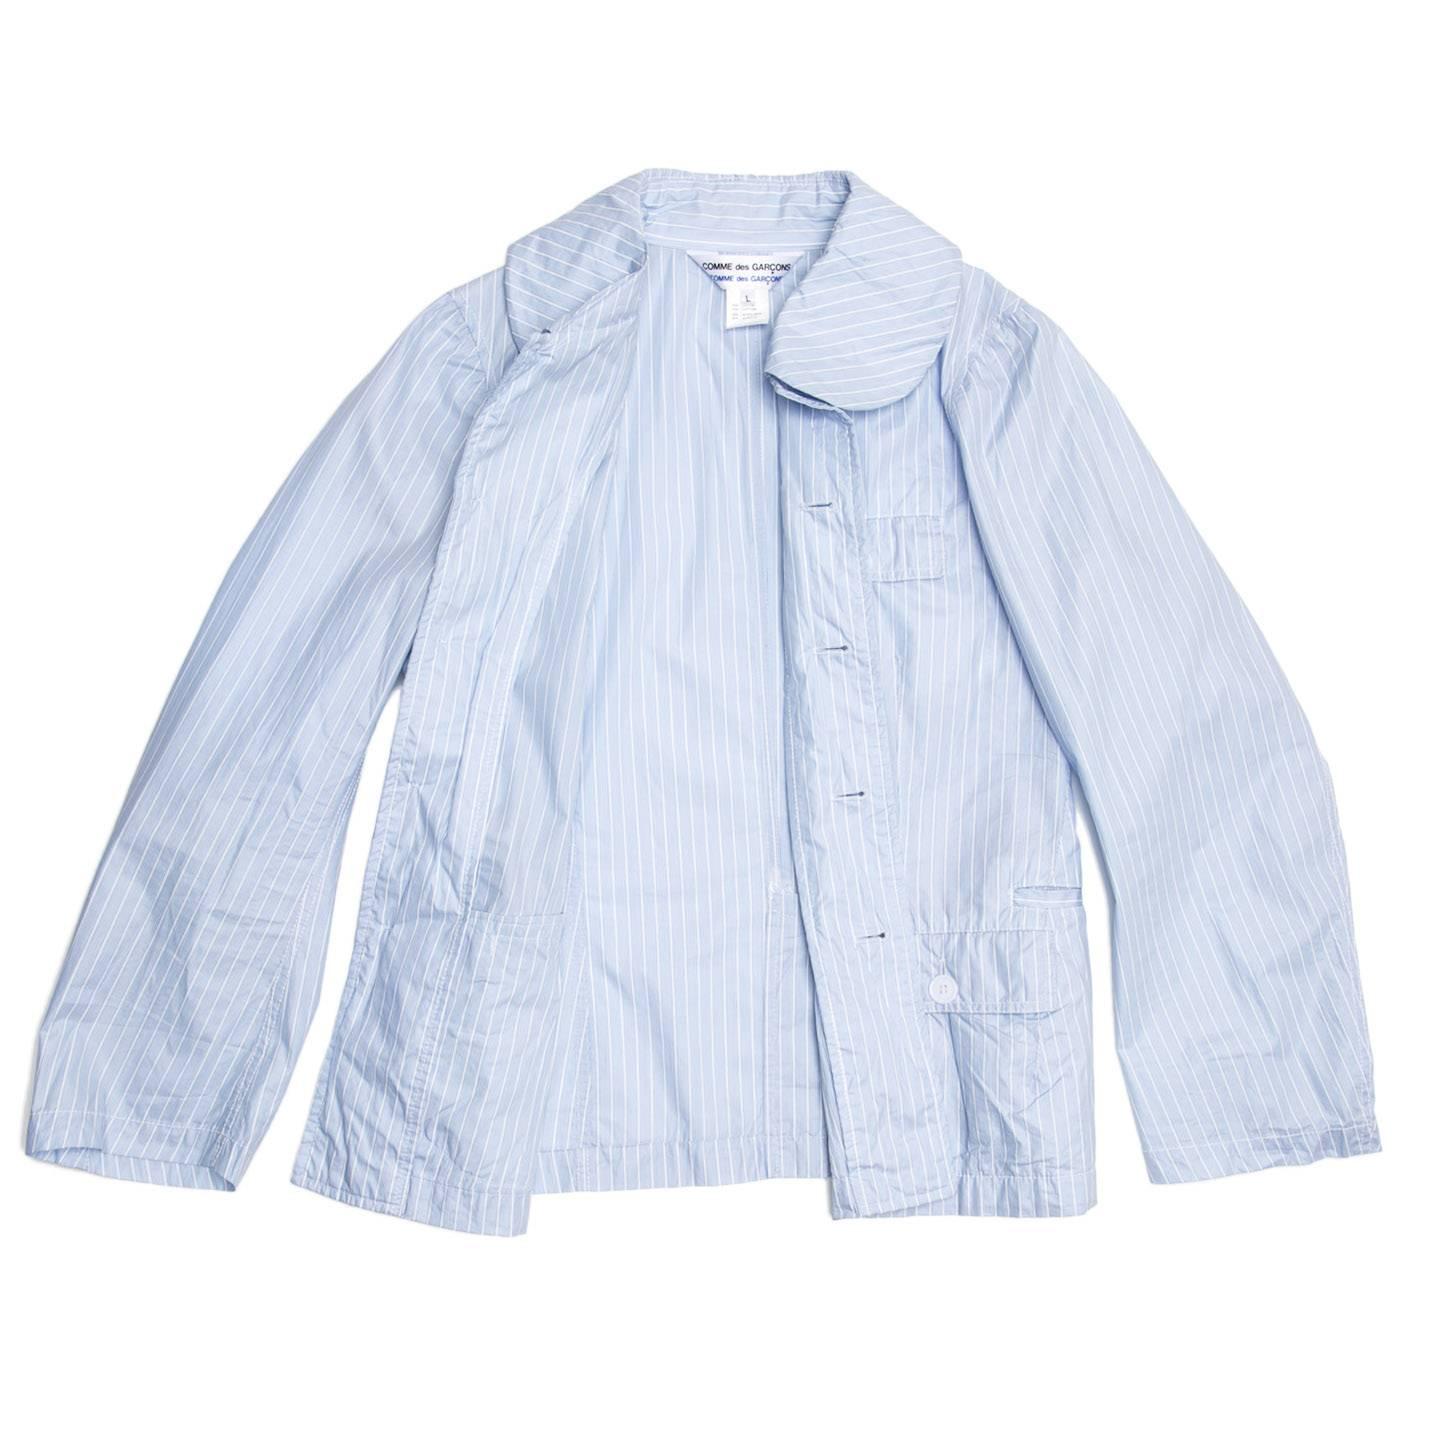 Comme des Garçons Blue & White Striped Slicker Jacket In Excellent Condition For Sale In Brooklyn, NY